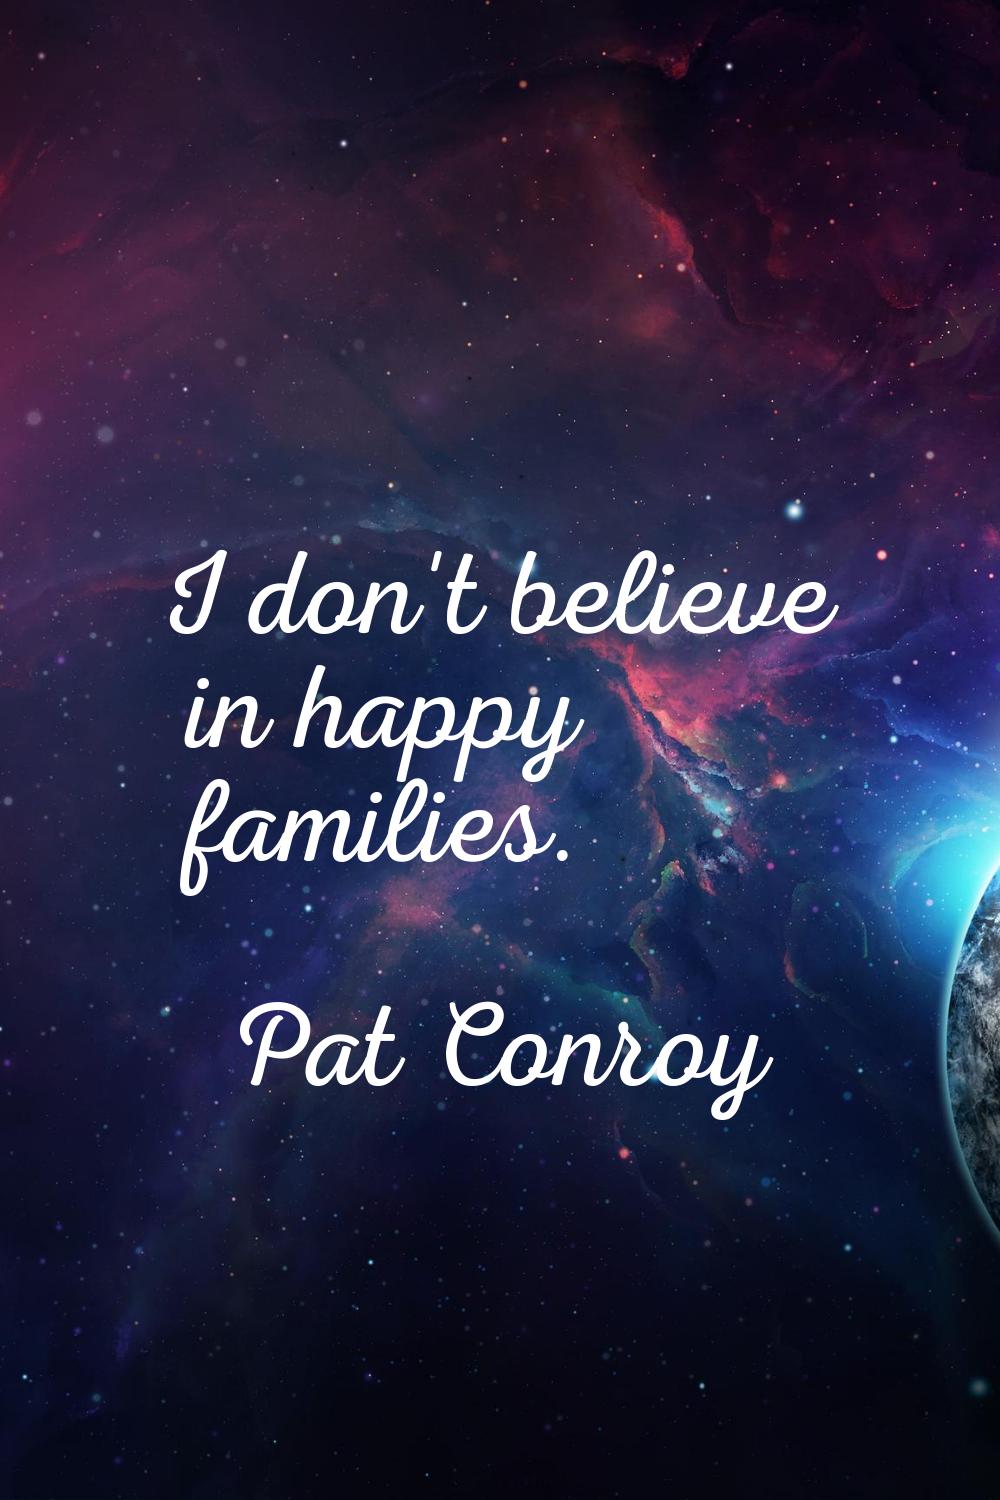 I don't believe in happy families.